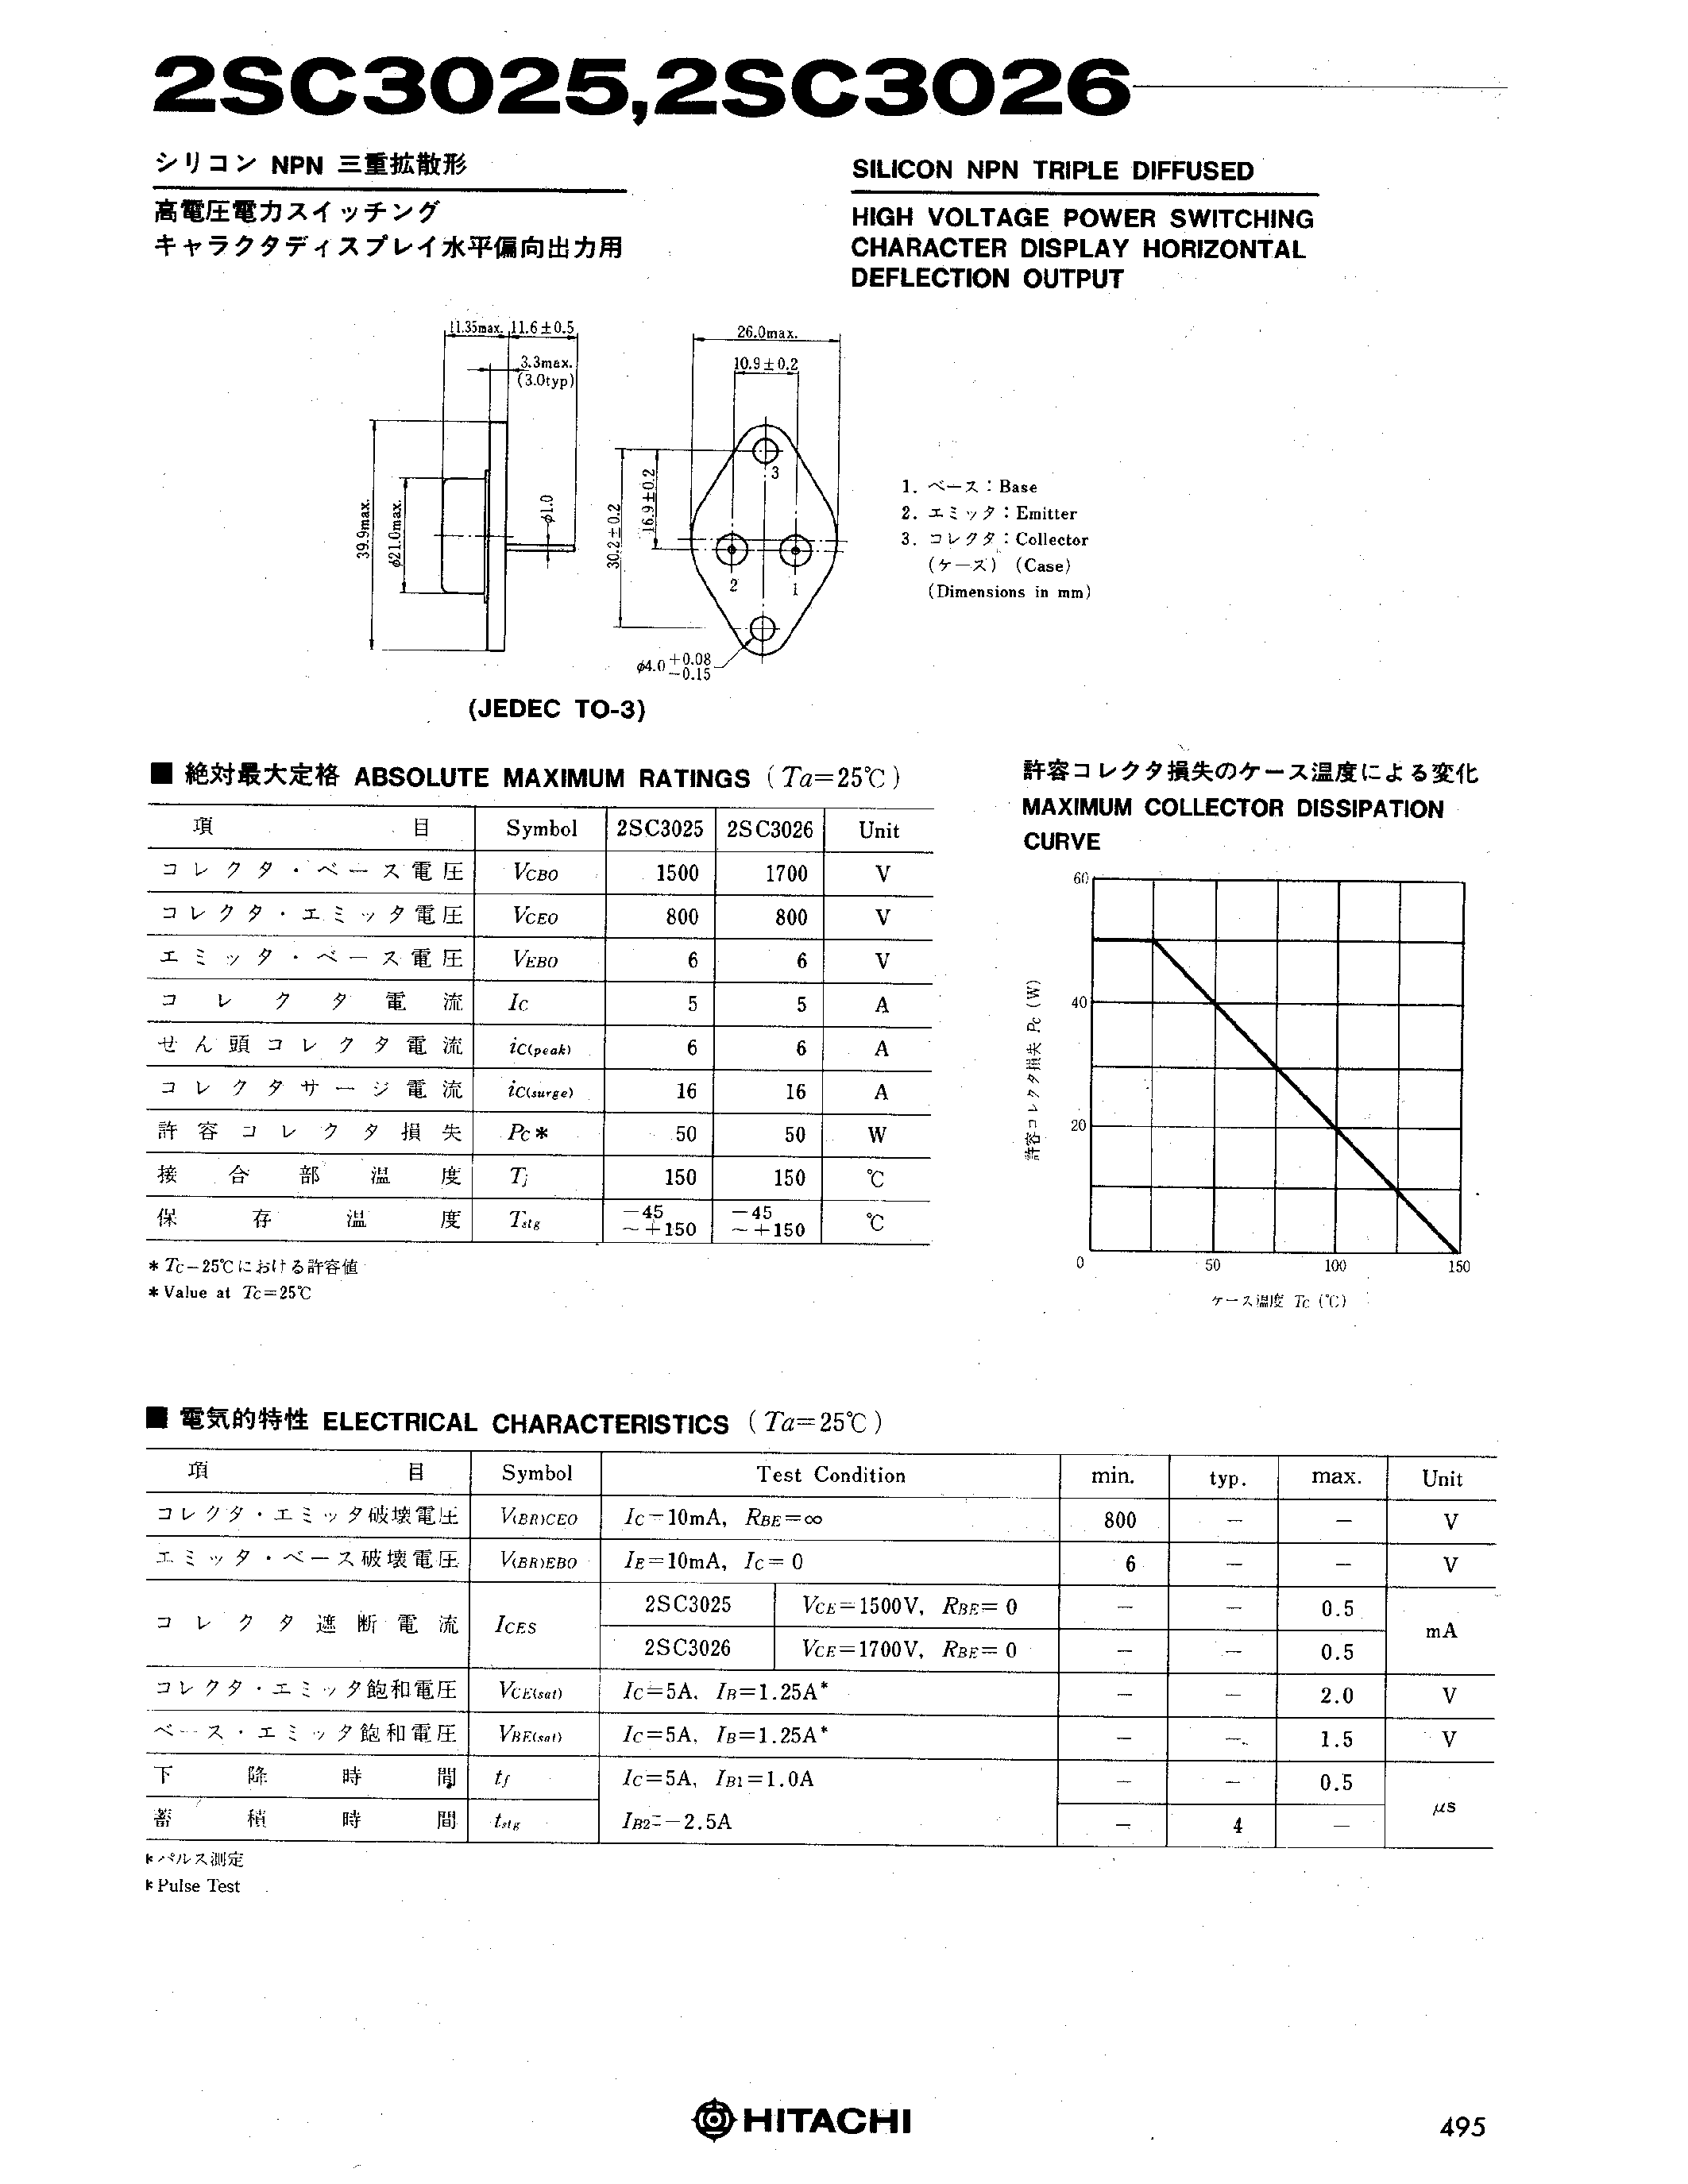 Datasheet 2SC3025 - (2SC3025 - 2SC3026) HIGH VOLTAGE POWER SWITCHING CHARACTER DISPLAY HORIZONTAL DEFLECTION OUTPUT page 1